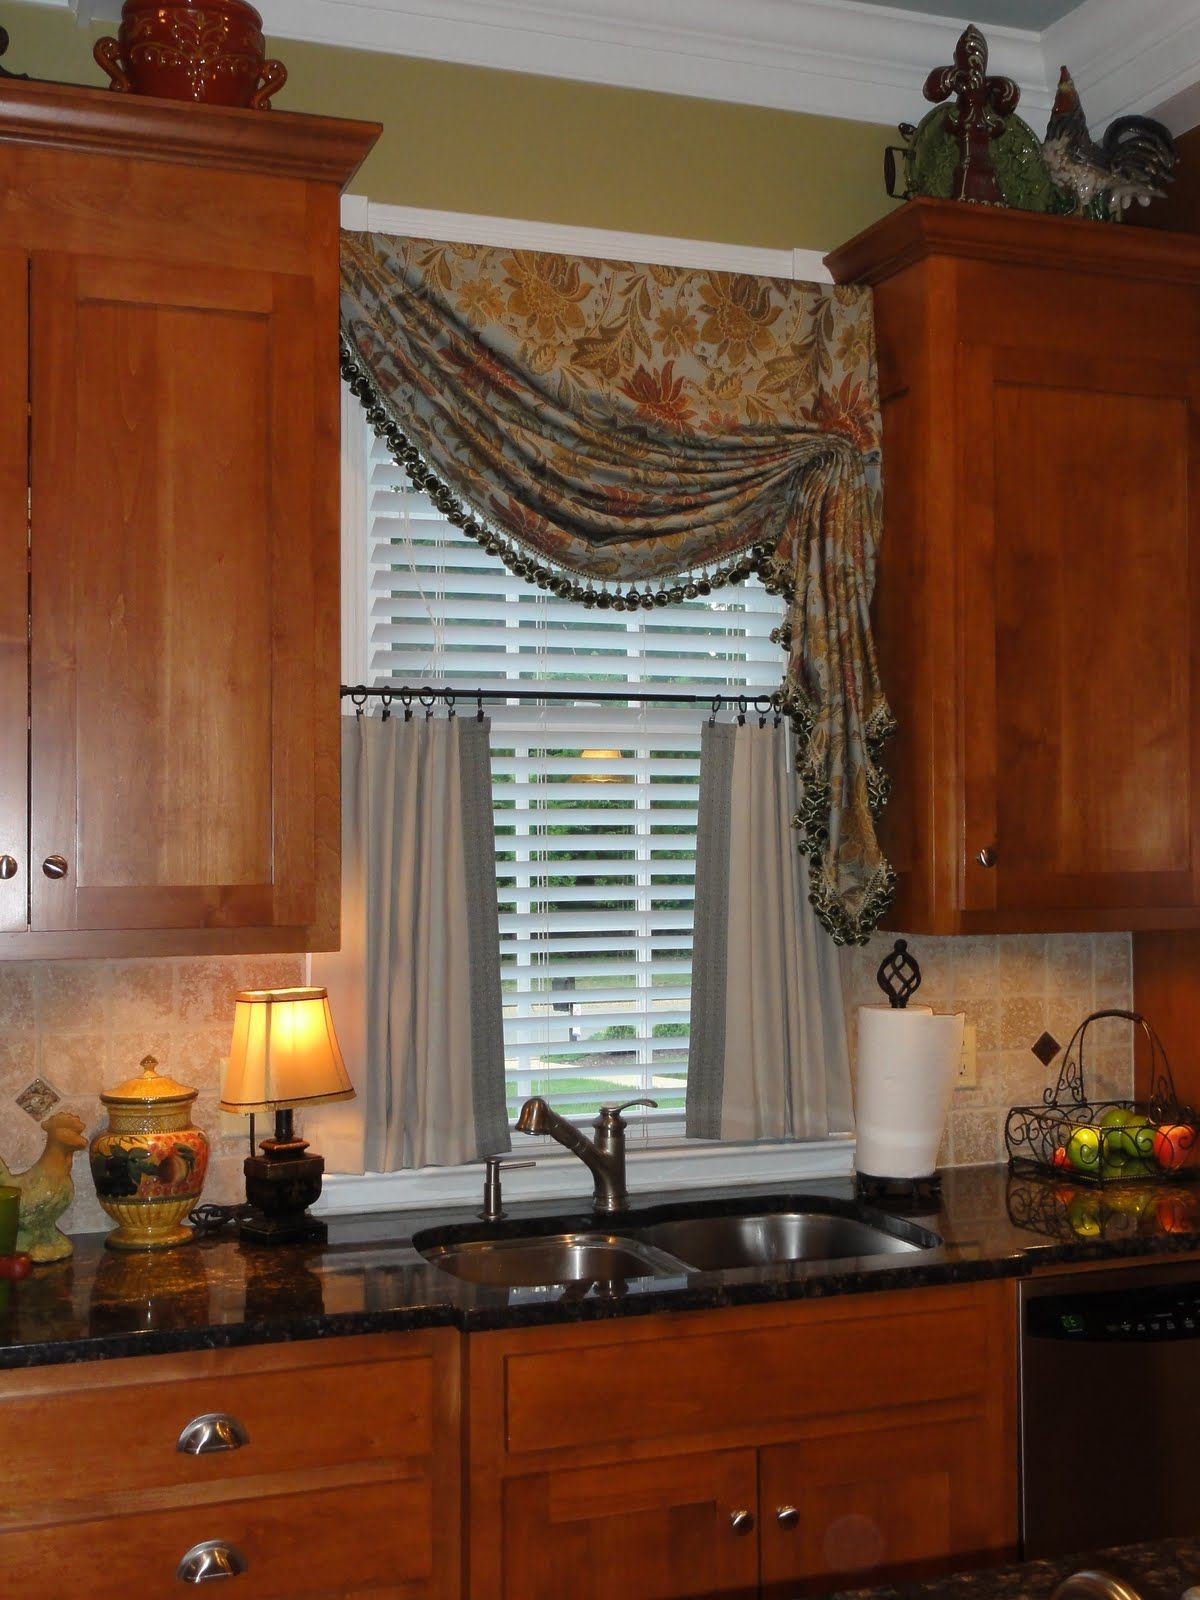 Penny'S Kitchen Curtains
 A Bunch of Inspiring Kitchen Curtains Ideas for Getting